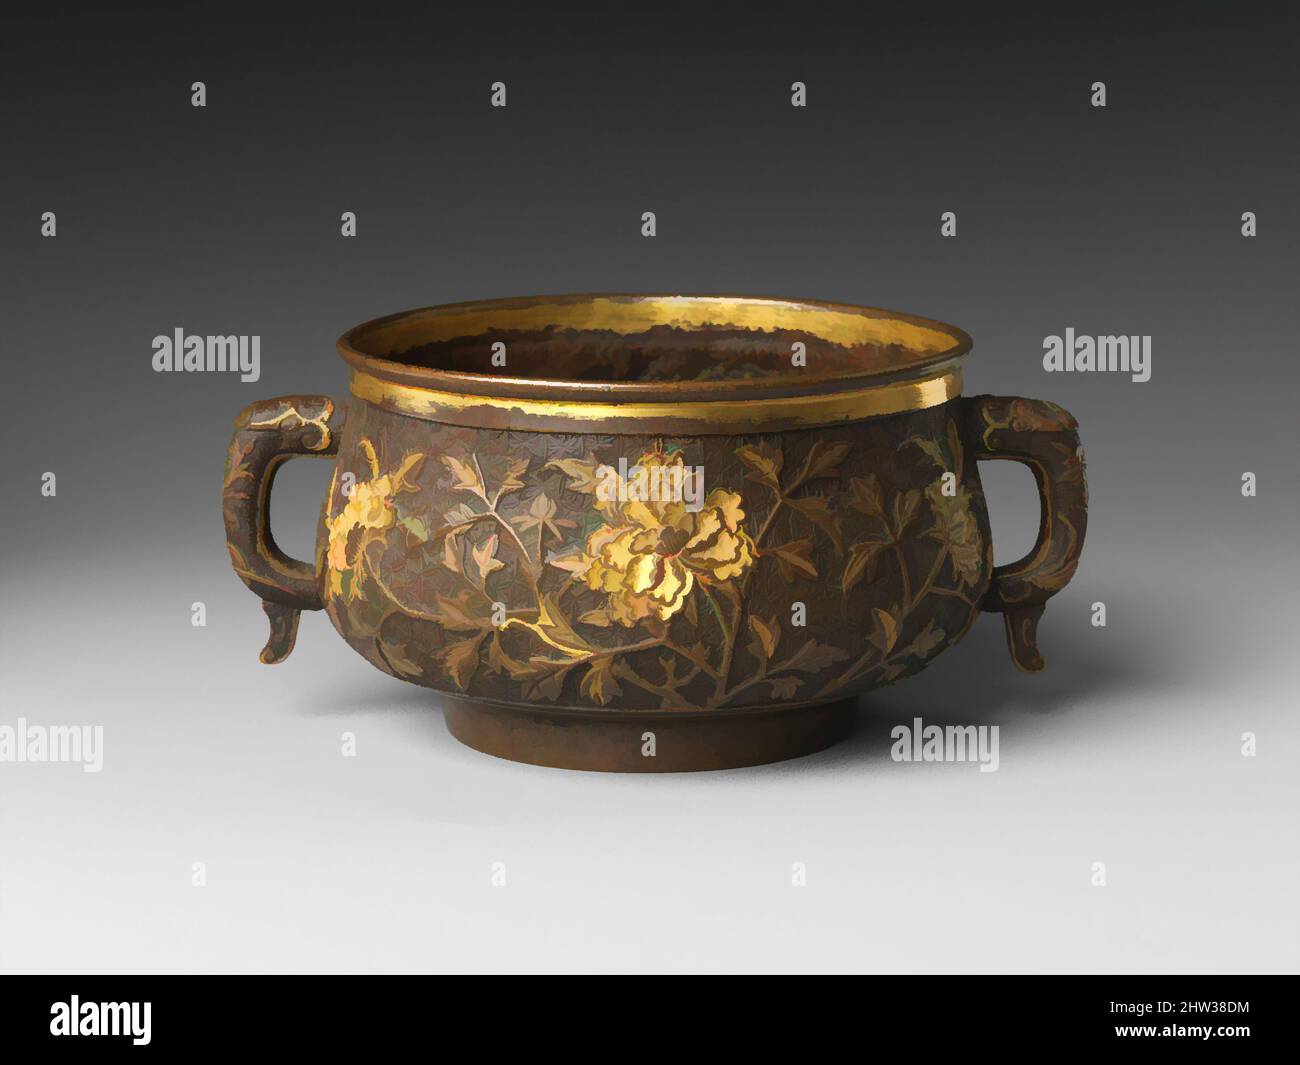 Art inspired by Incense burner, Ming dynasty (1368–1644), late 16th–17th century, China, Copper with gilding, H. 6 1/4 in. (15.9 cm); W. 2 7/8 in. (7.3 cm), Metalwork, Attributed to Hu Wenming (Chinese, active late 16th–early 17th century), Implements commonly used for burning incense, Classic works modernized by Artotop with a splash of modernity. Shapes, color and value, eye-catching visual impact on art. Emotions through freedom of artworks in a contemporary way. A timeless message pursuing a wildly creative new direction. Artists turning to the digital medium and creating the Artotop NFT Stock Photo